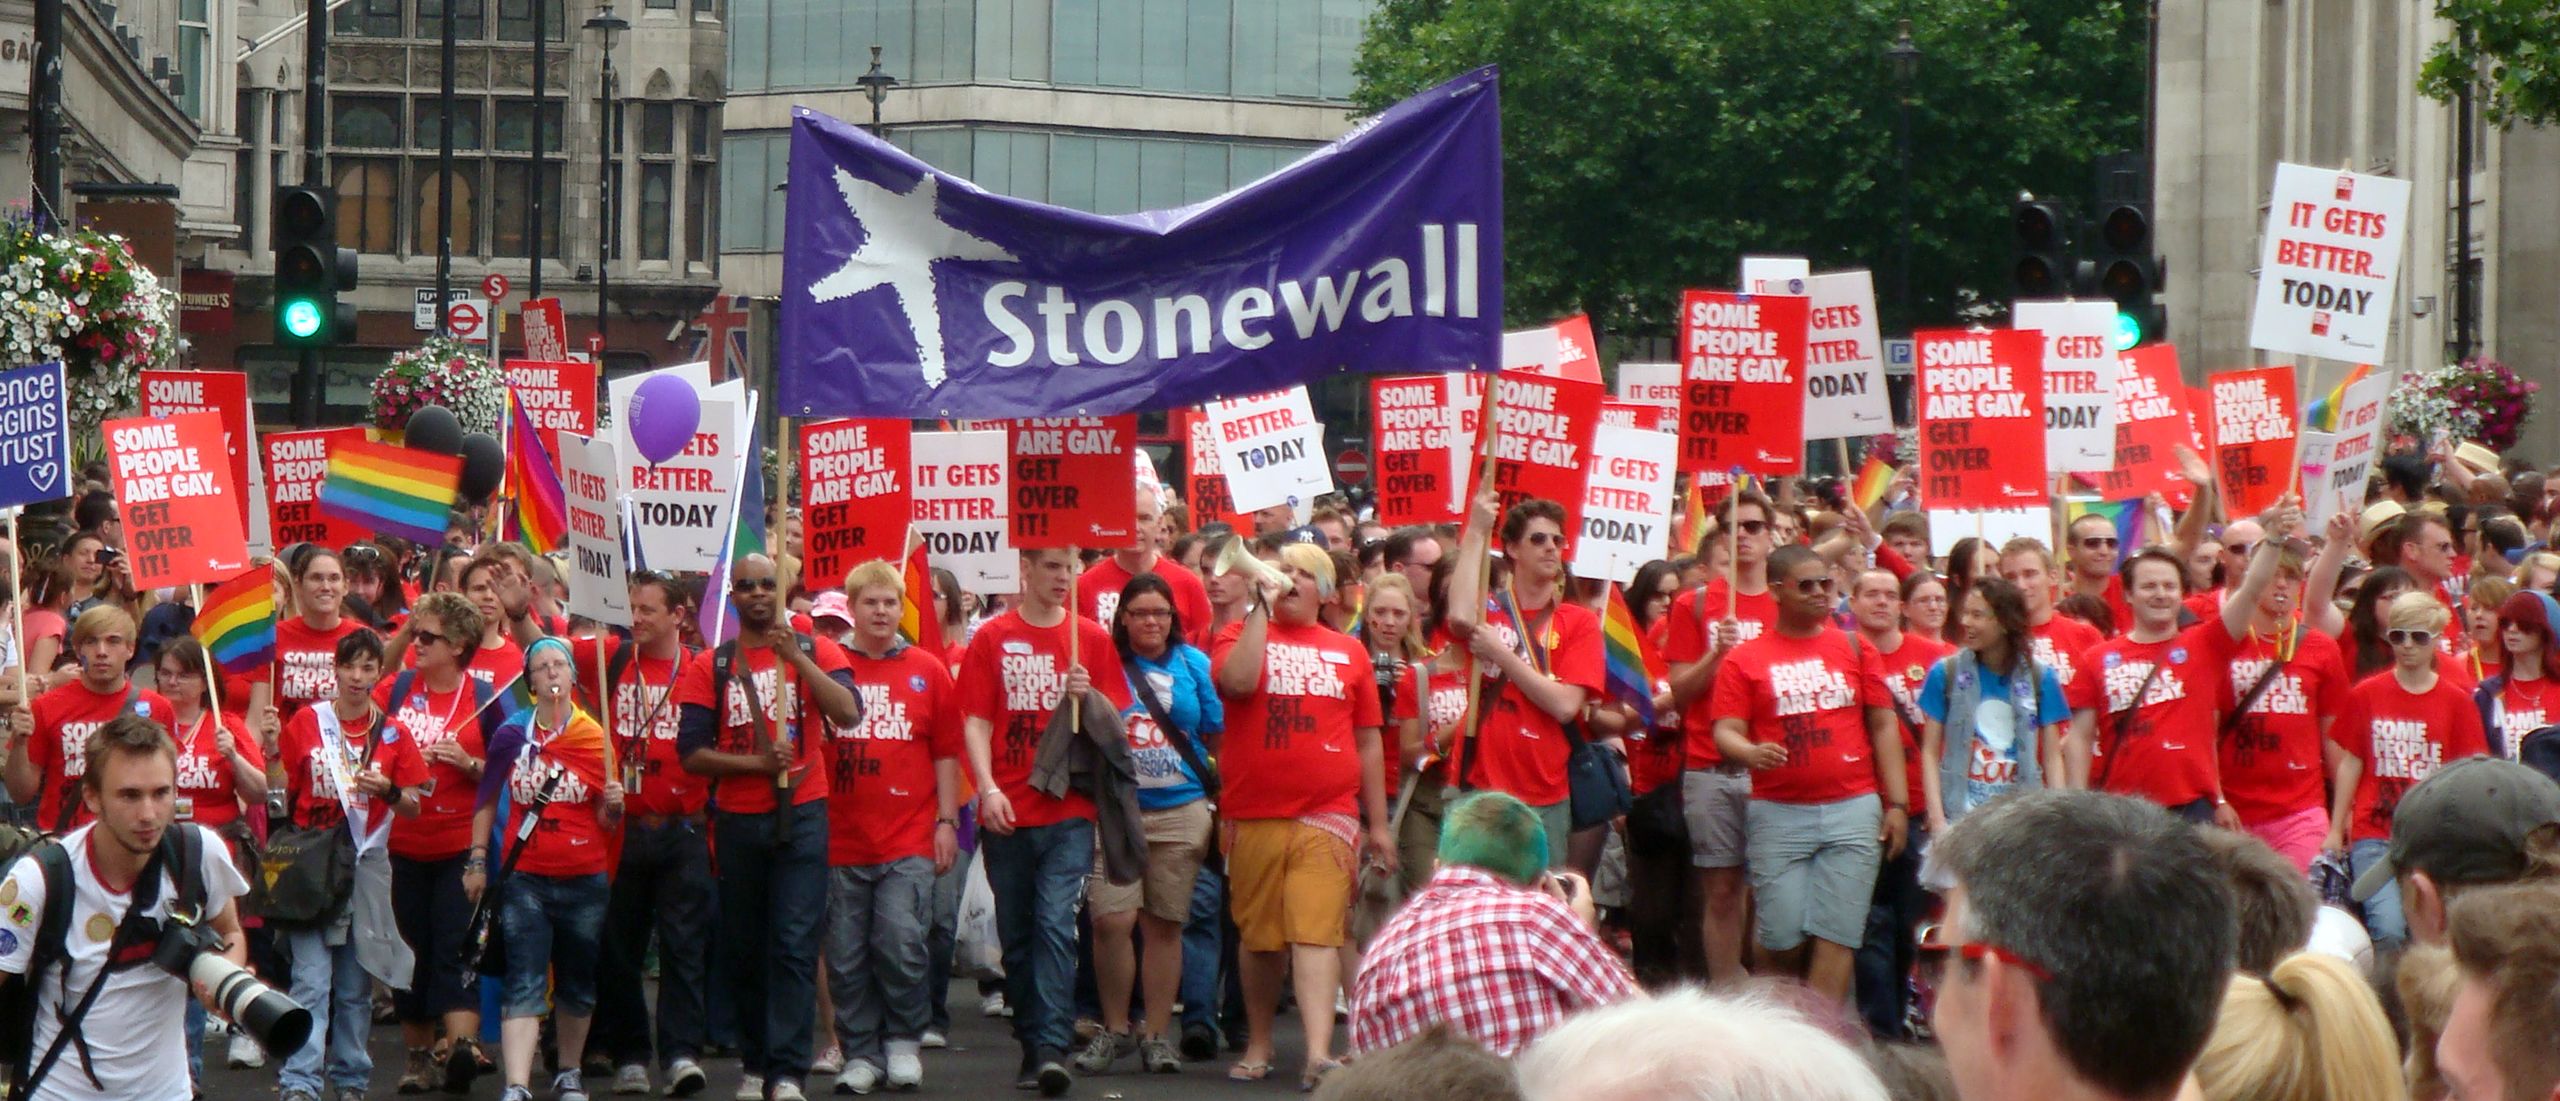 Group photo of activists and campaigners for Stonewall mostly dressed in Stonewall red t-shirts which read phrases such as “Some people are gay, get over it” and so forth. There are also many, many signs and rainbows. Wholesome.